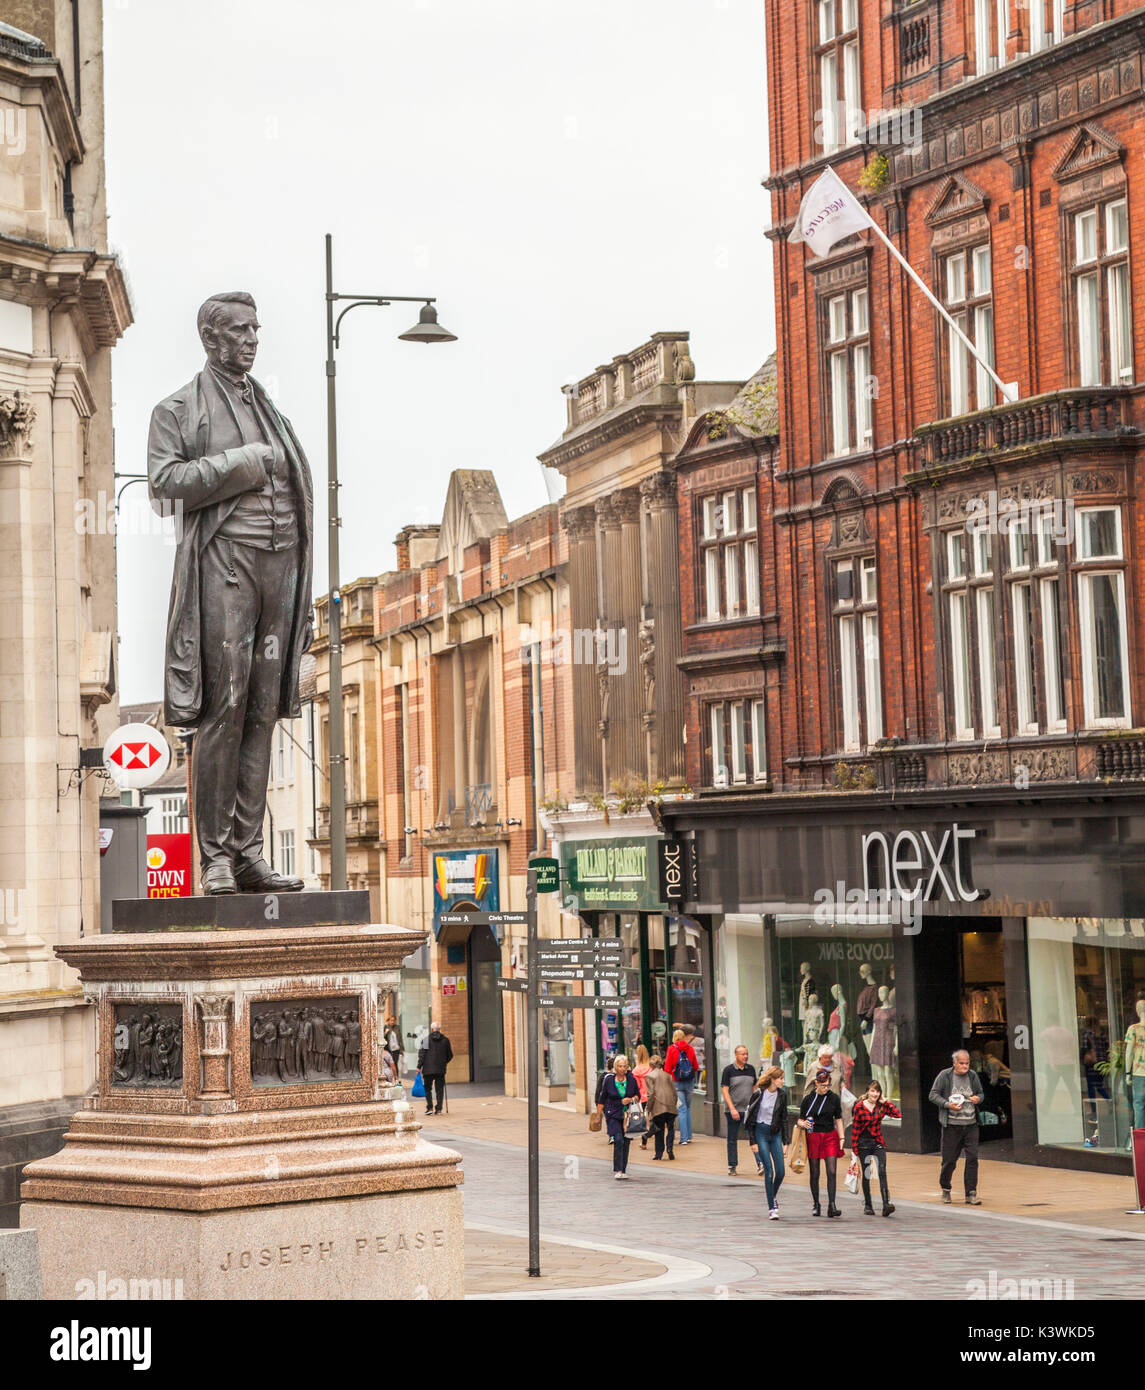 The statue of Joseph Pease in Darlington town centre,England,UK Stock Photo